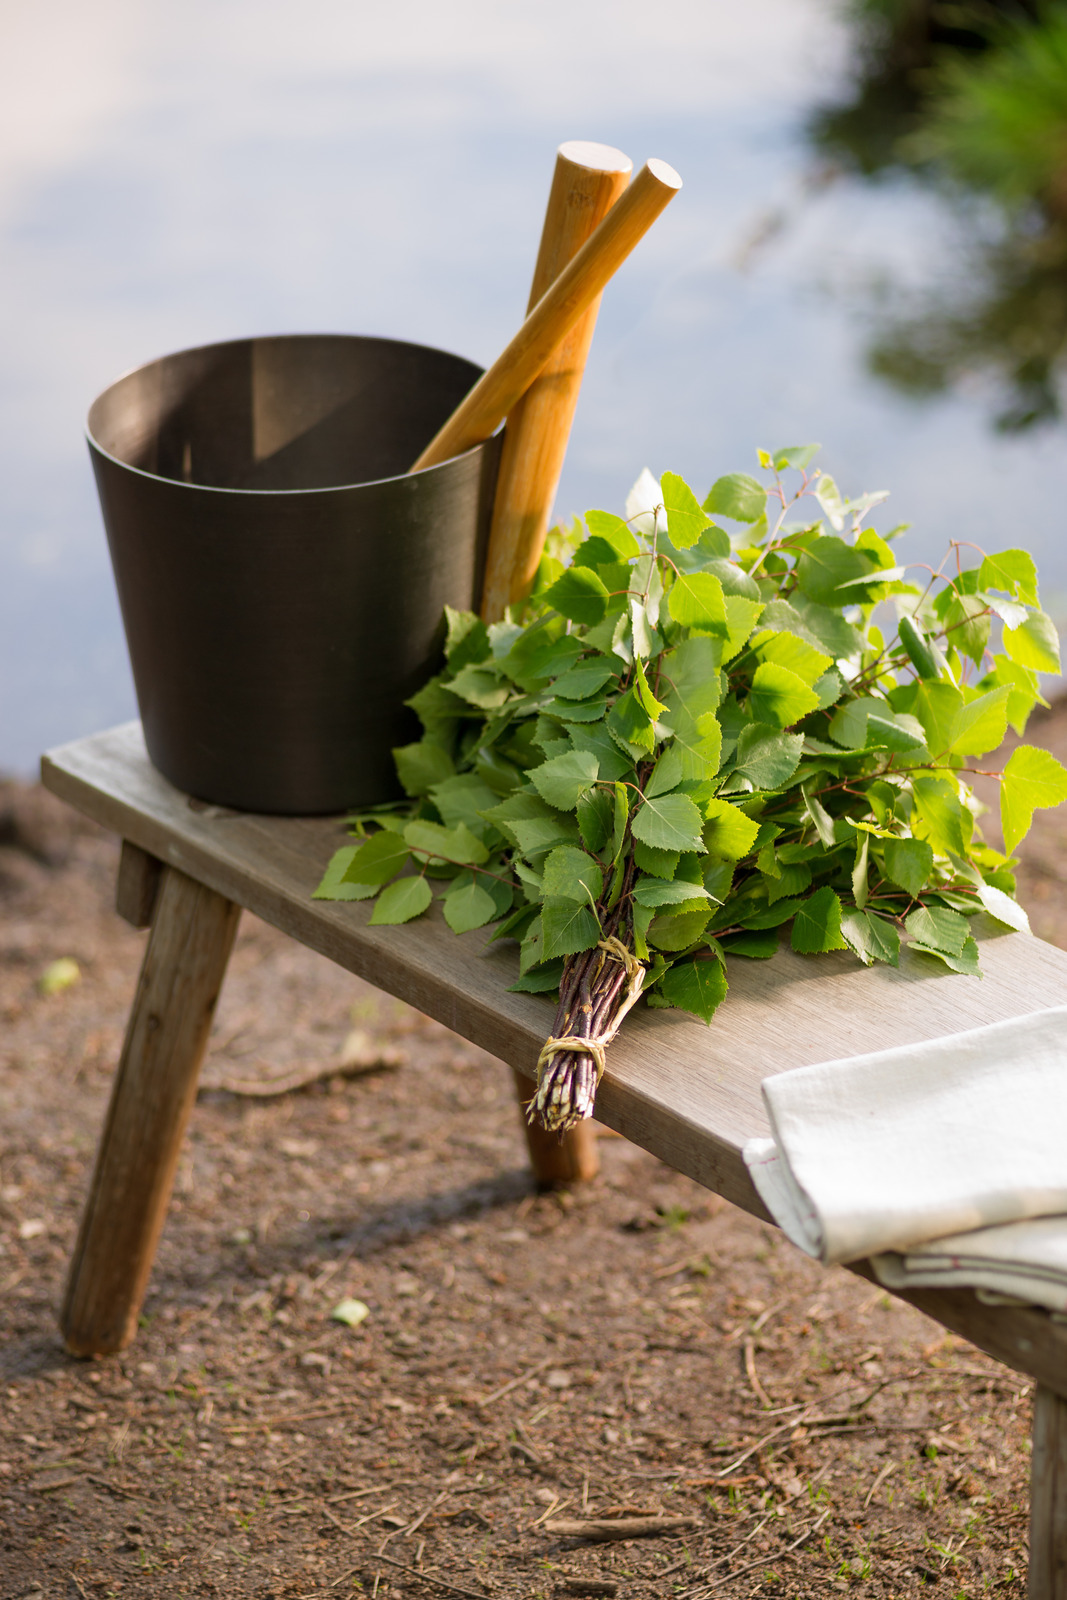 Birch whisk and other sauna objects on wooden bench by lake in Finland at midsummer.